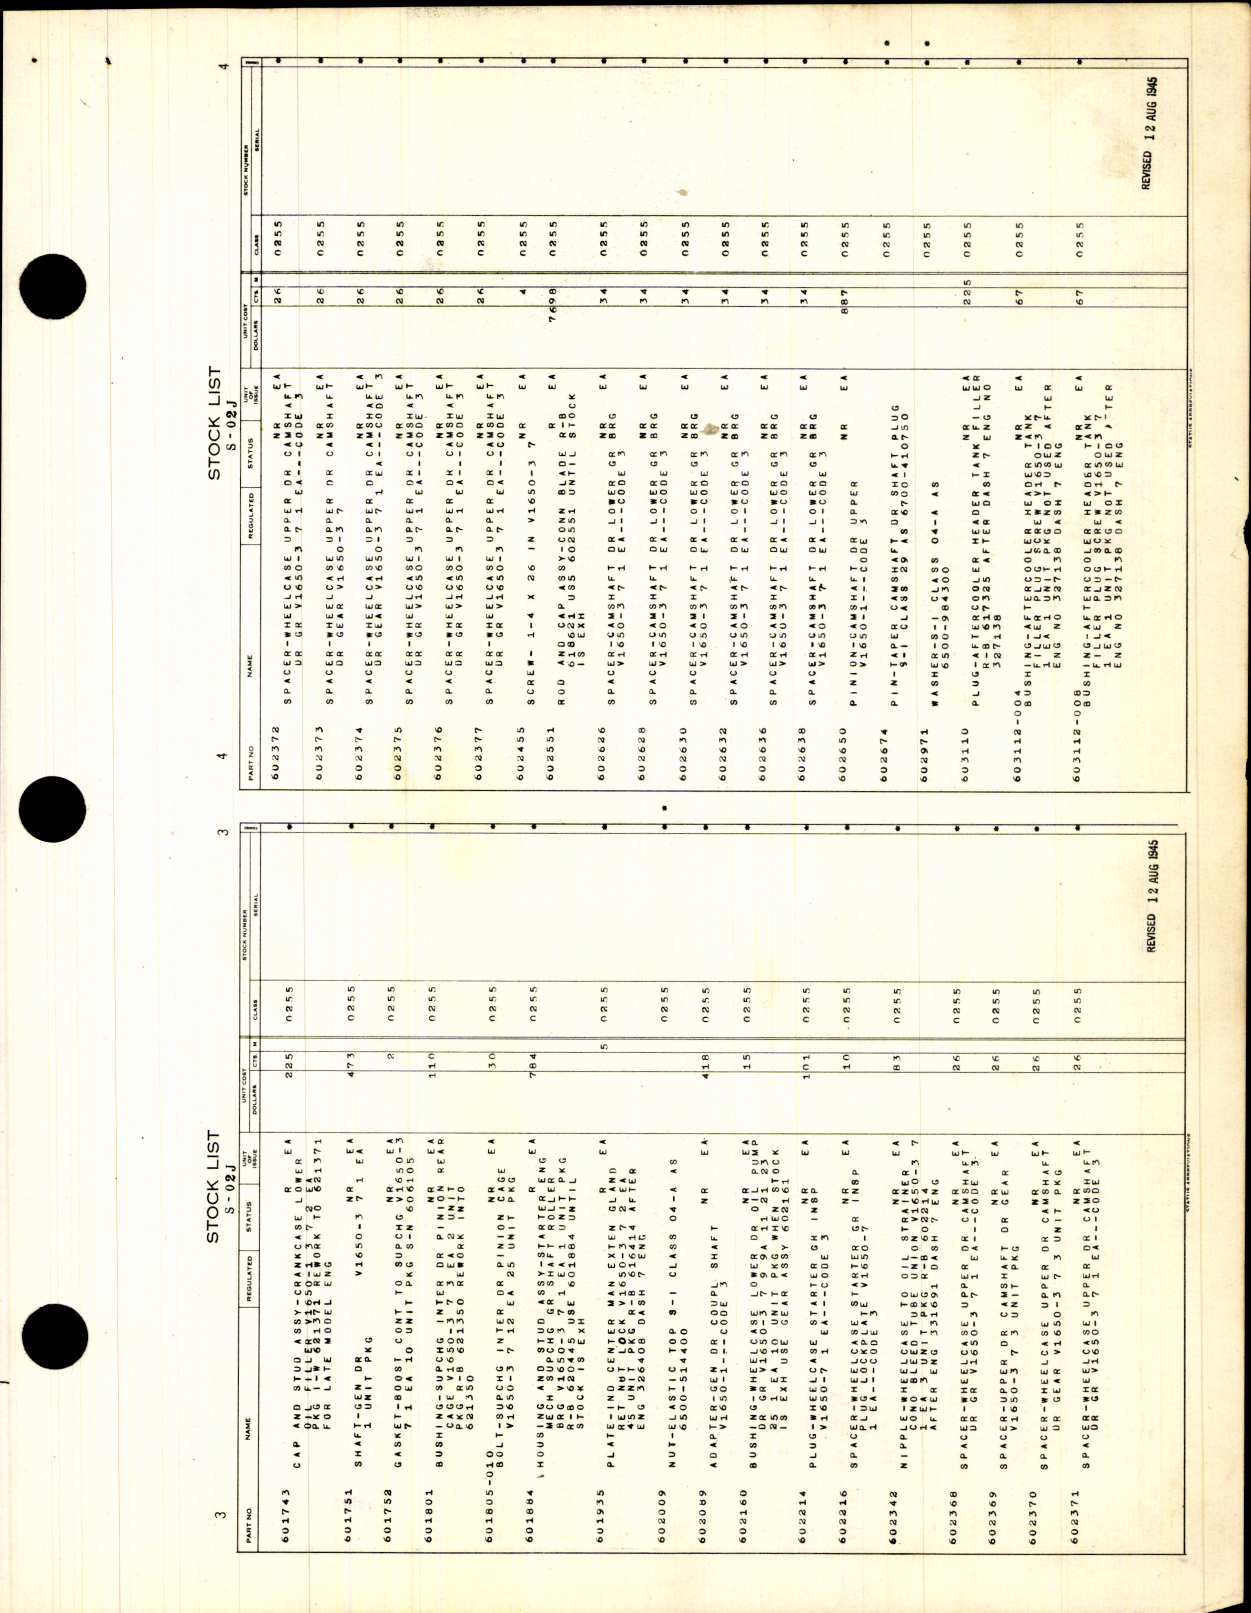 Sample page 5 from AirCorps Library document: Stock List - Parts For Rolls-Royce Engines